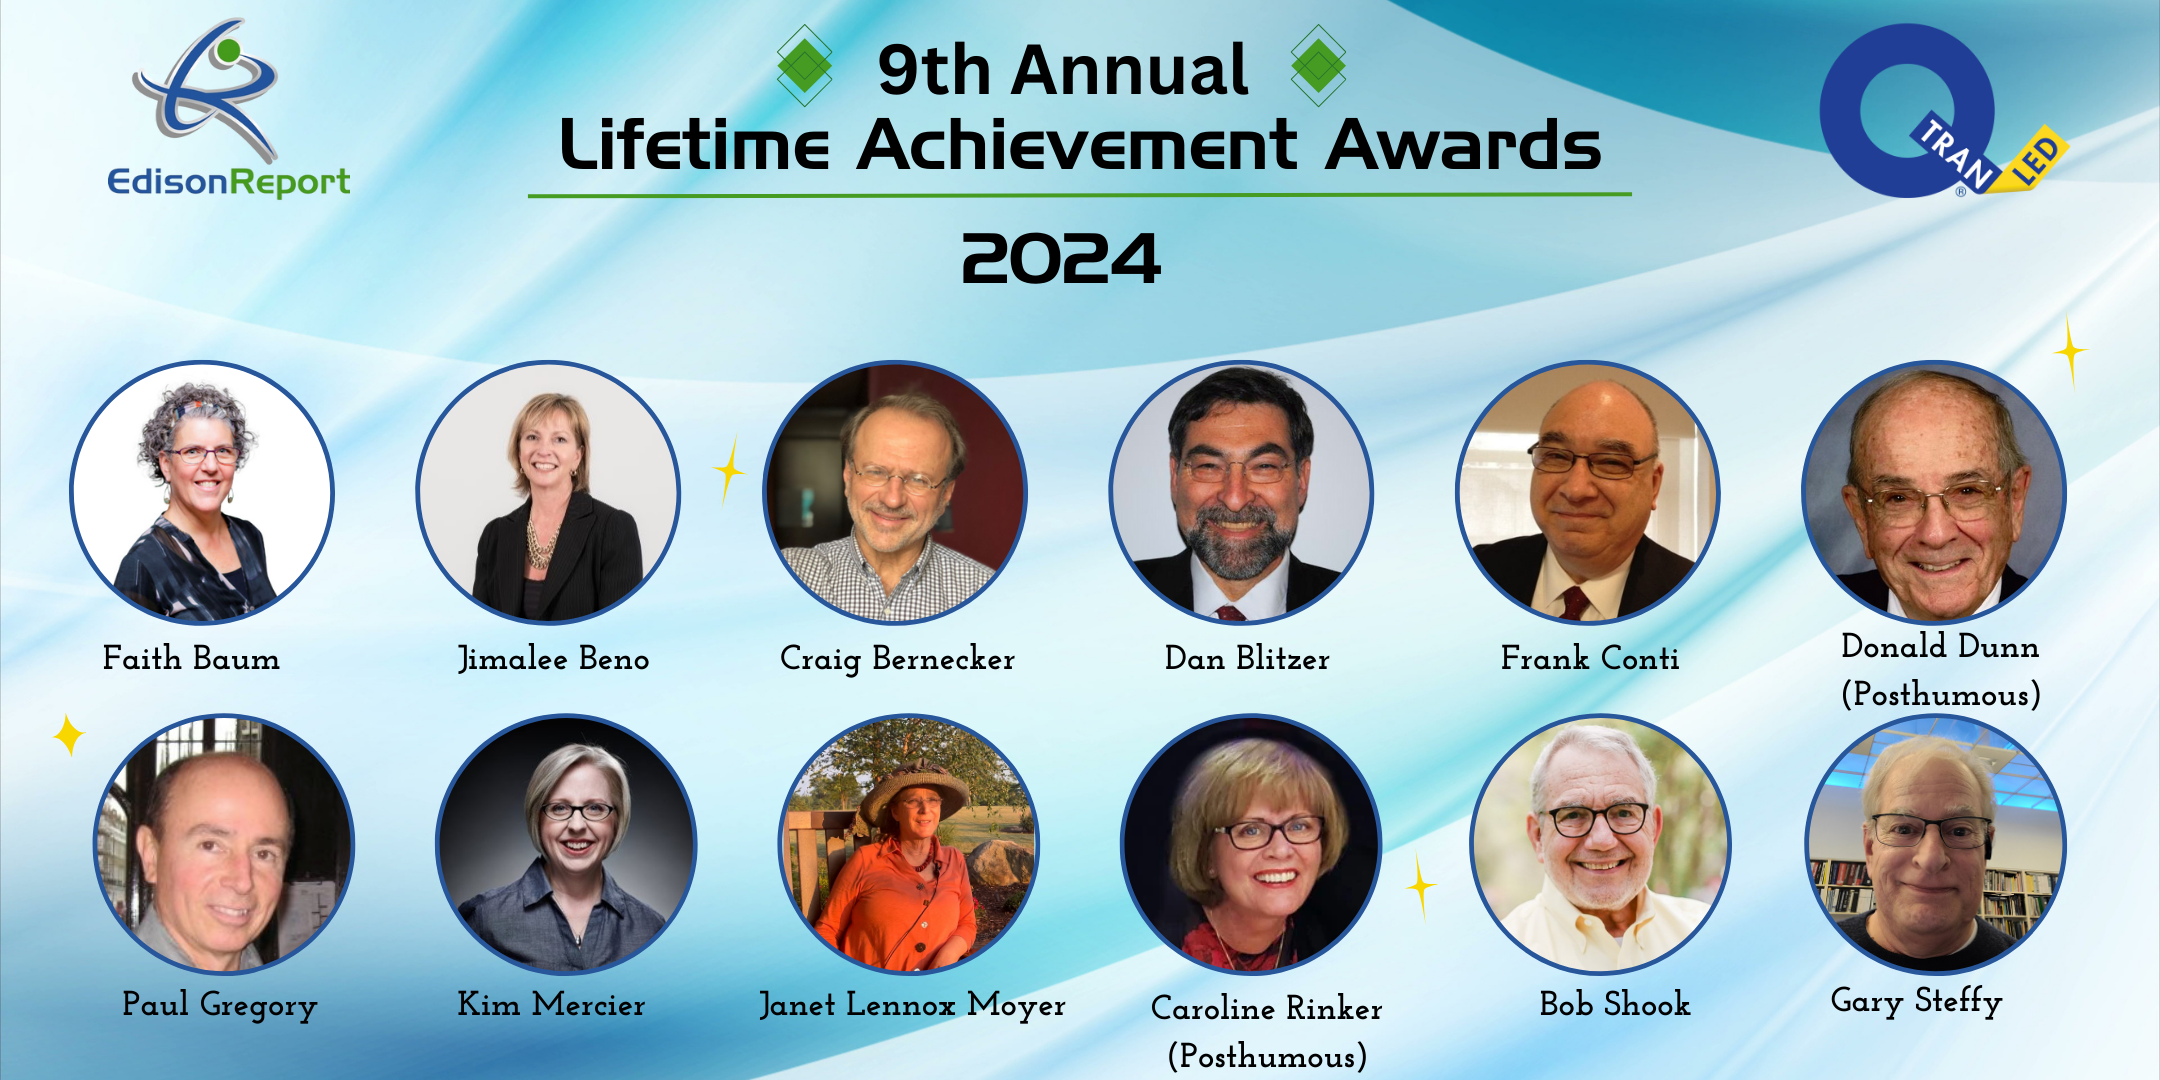 9th Annual Lifetime Achievement Awards Honorees